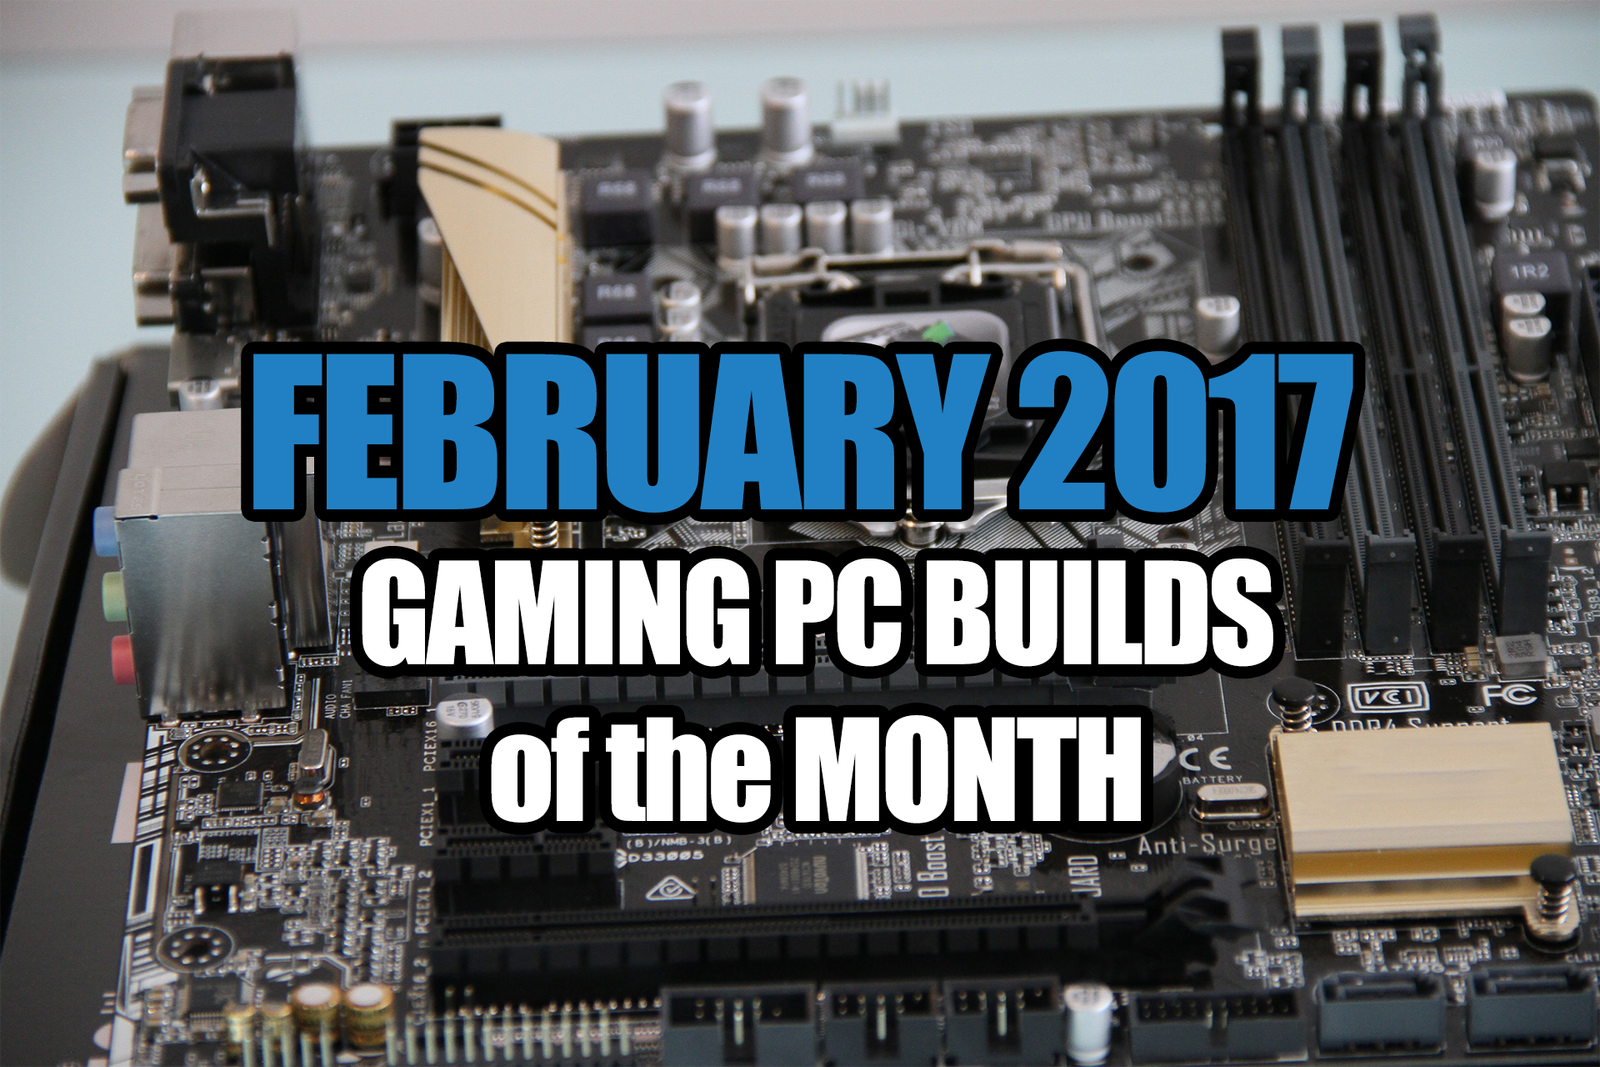 February 2017 Gaming PC Builds of the Month